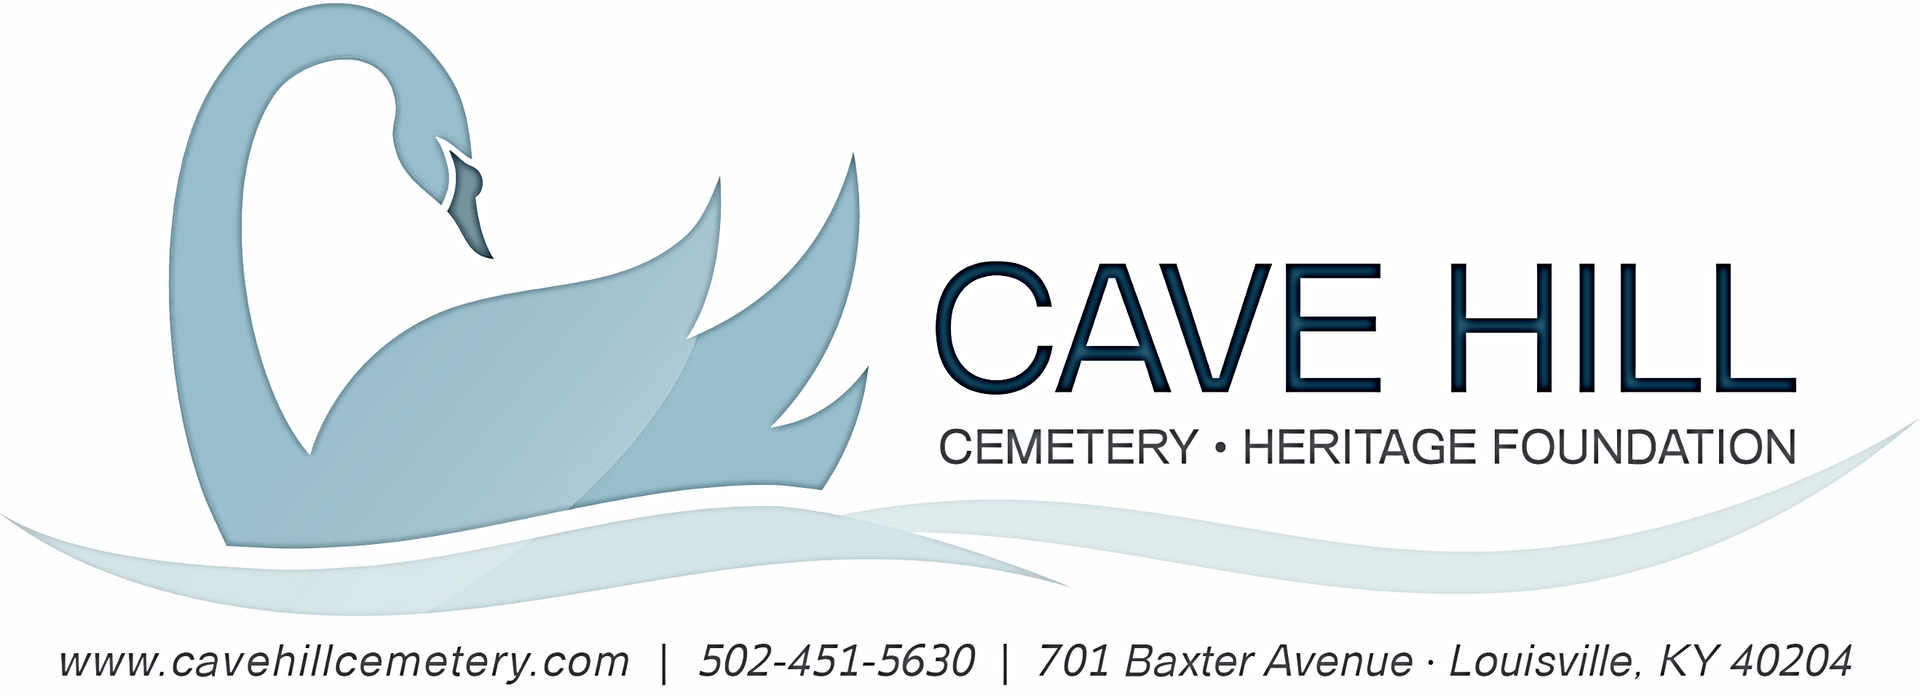 a logo for cave hill cemetery and heritage foundation